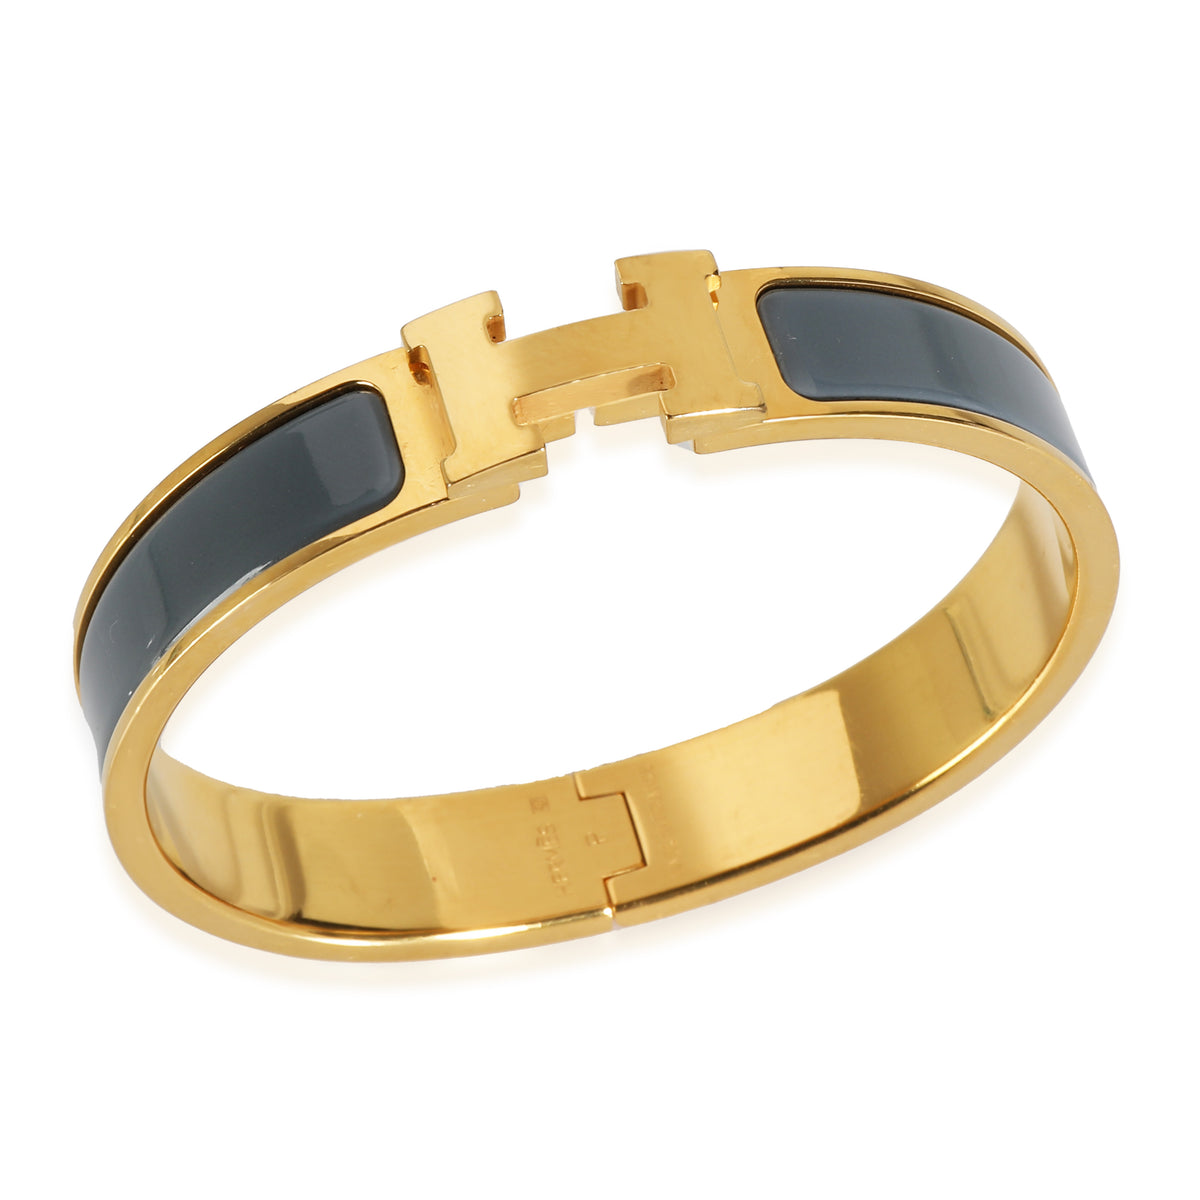 Clic H Bracelet in  Gold Plated